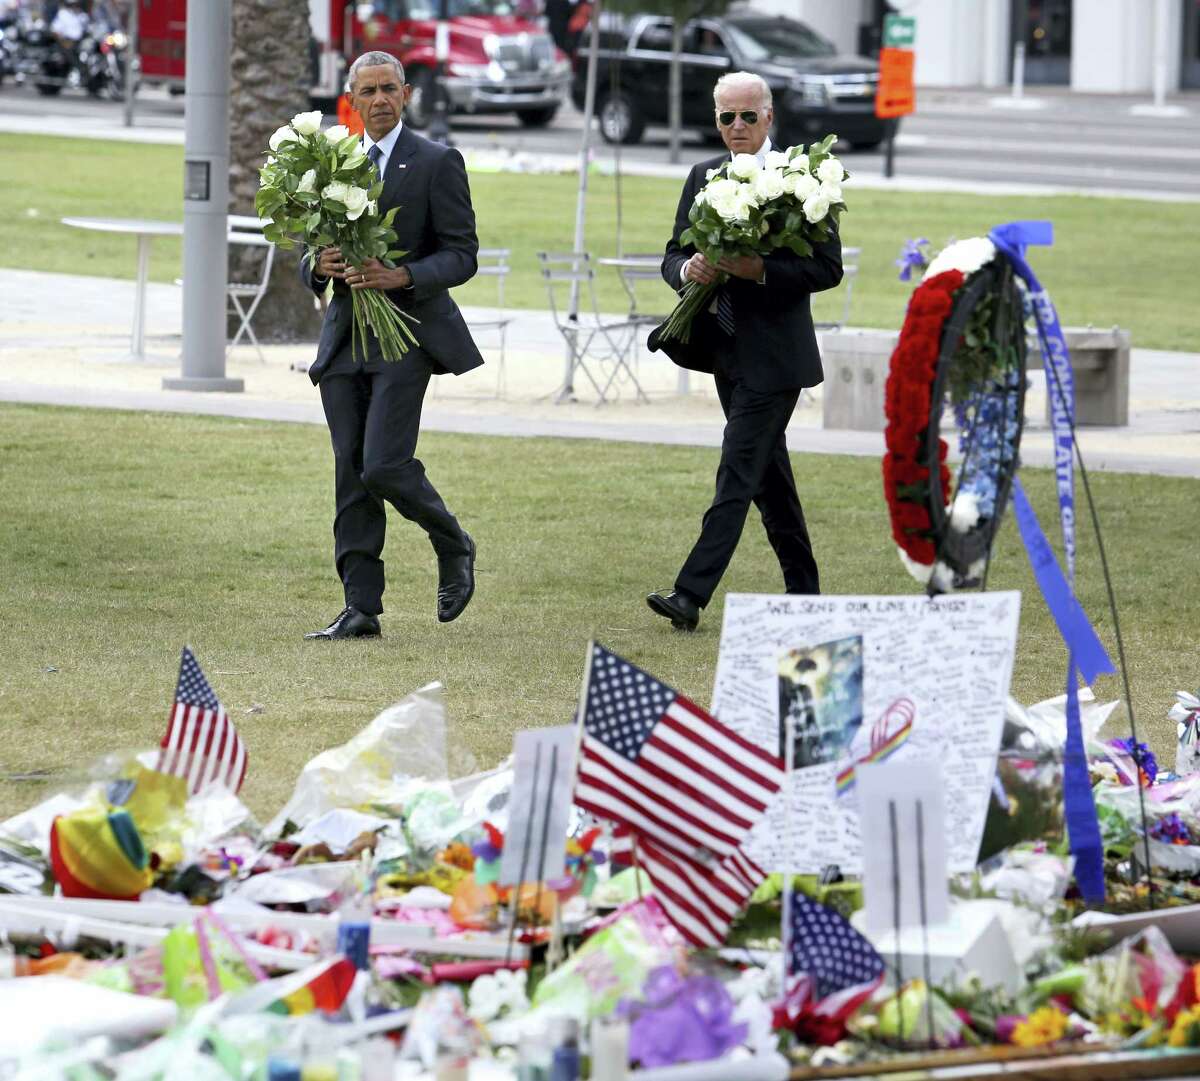 President Barack Obama and Vice President Joe Biden visit a makeshift memorial to the victims of the Pulse nightclub shooting, Thursday, June 16, 2016, in Orlando, Fla.